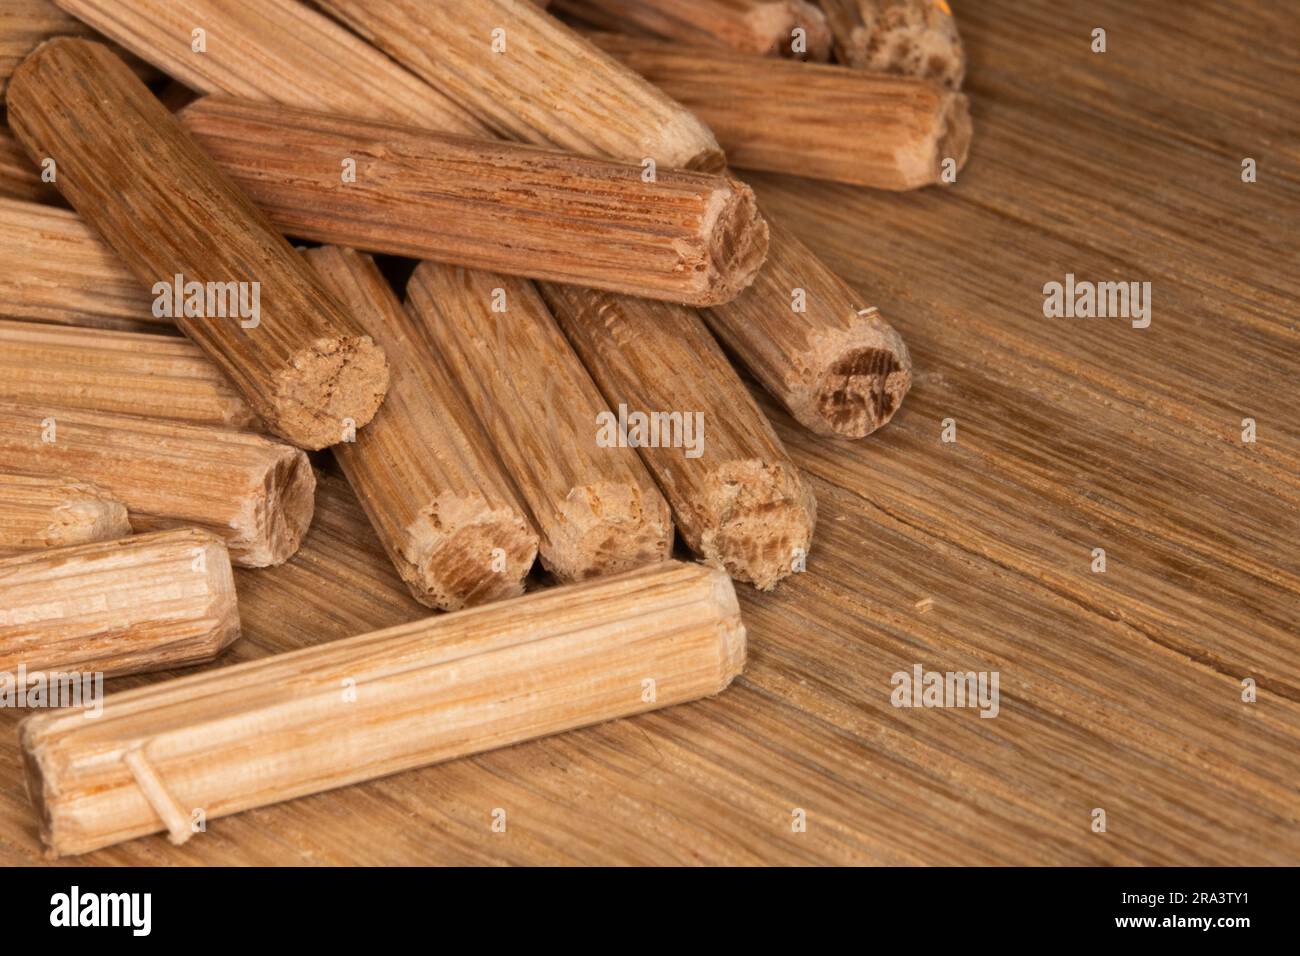 pile of oak dowel pins on oak  background, dowel pins used to join two pieces of wood, joint, joinery Stock Photo